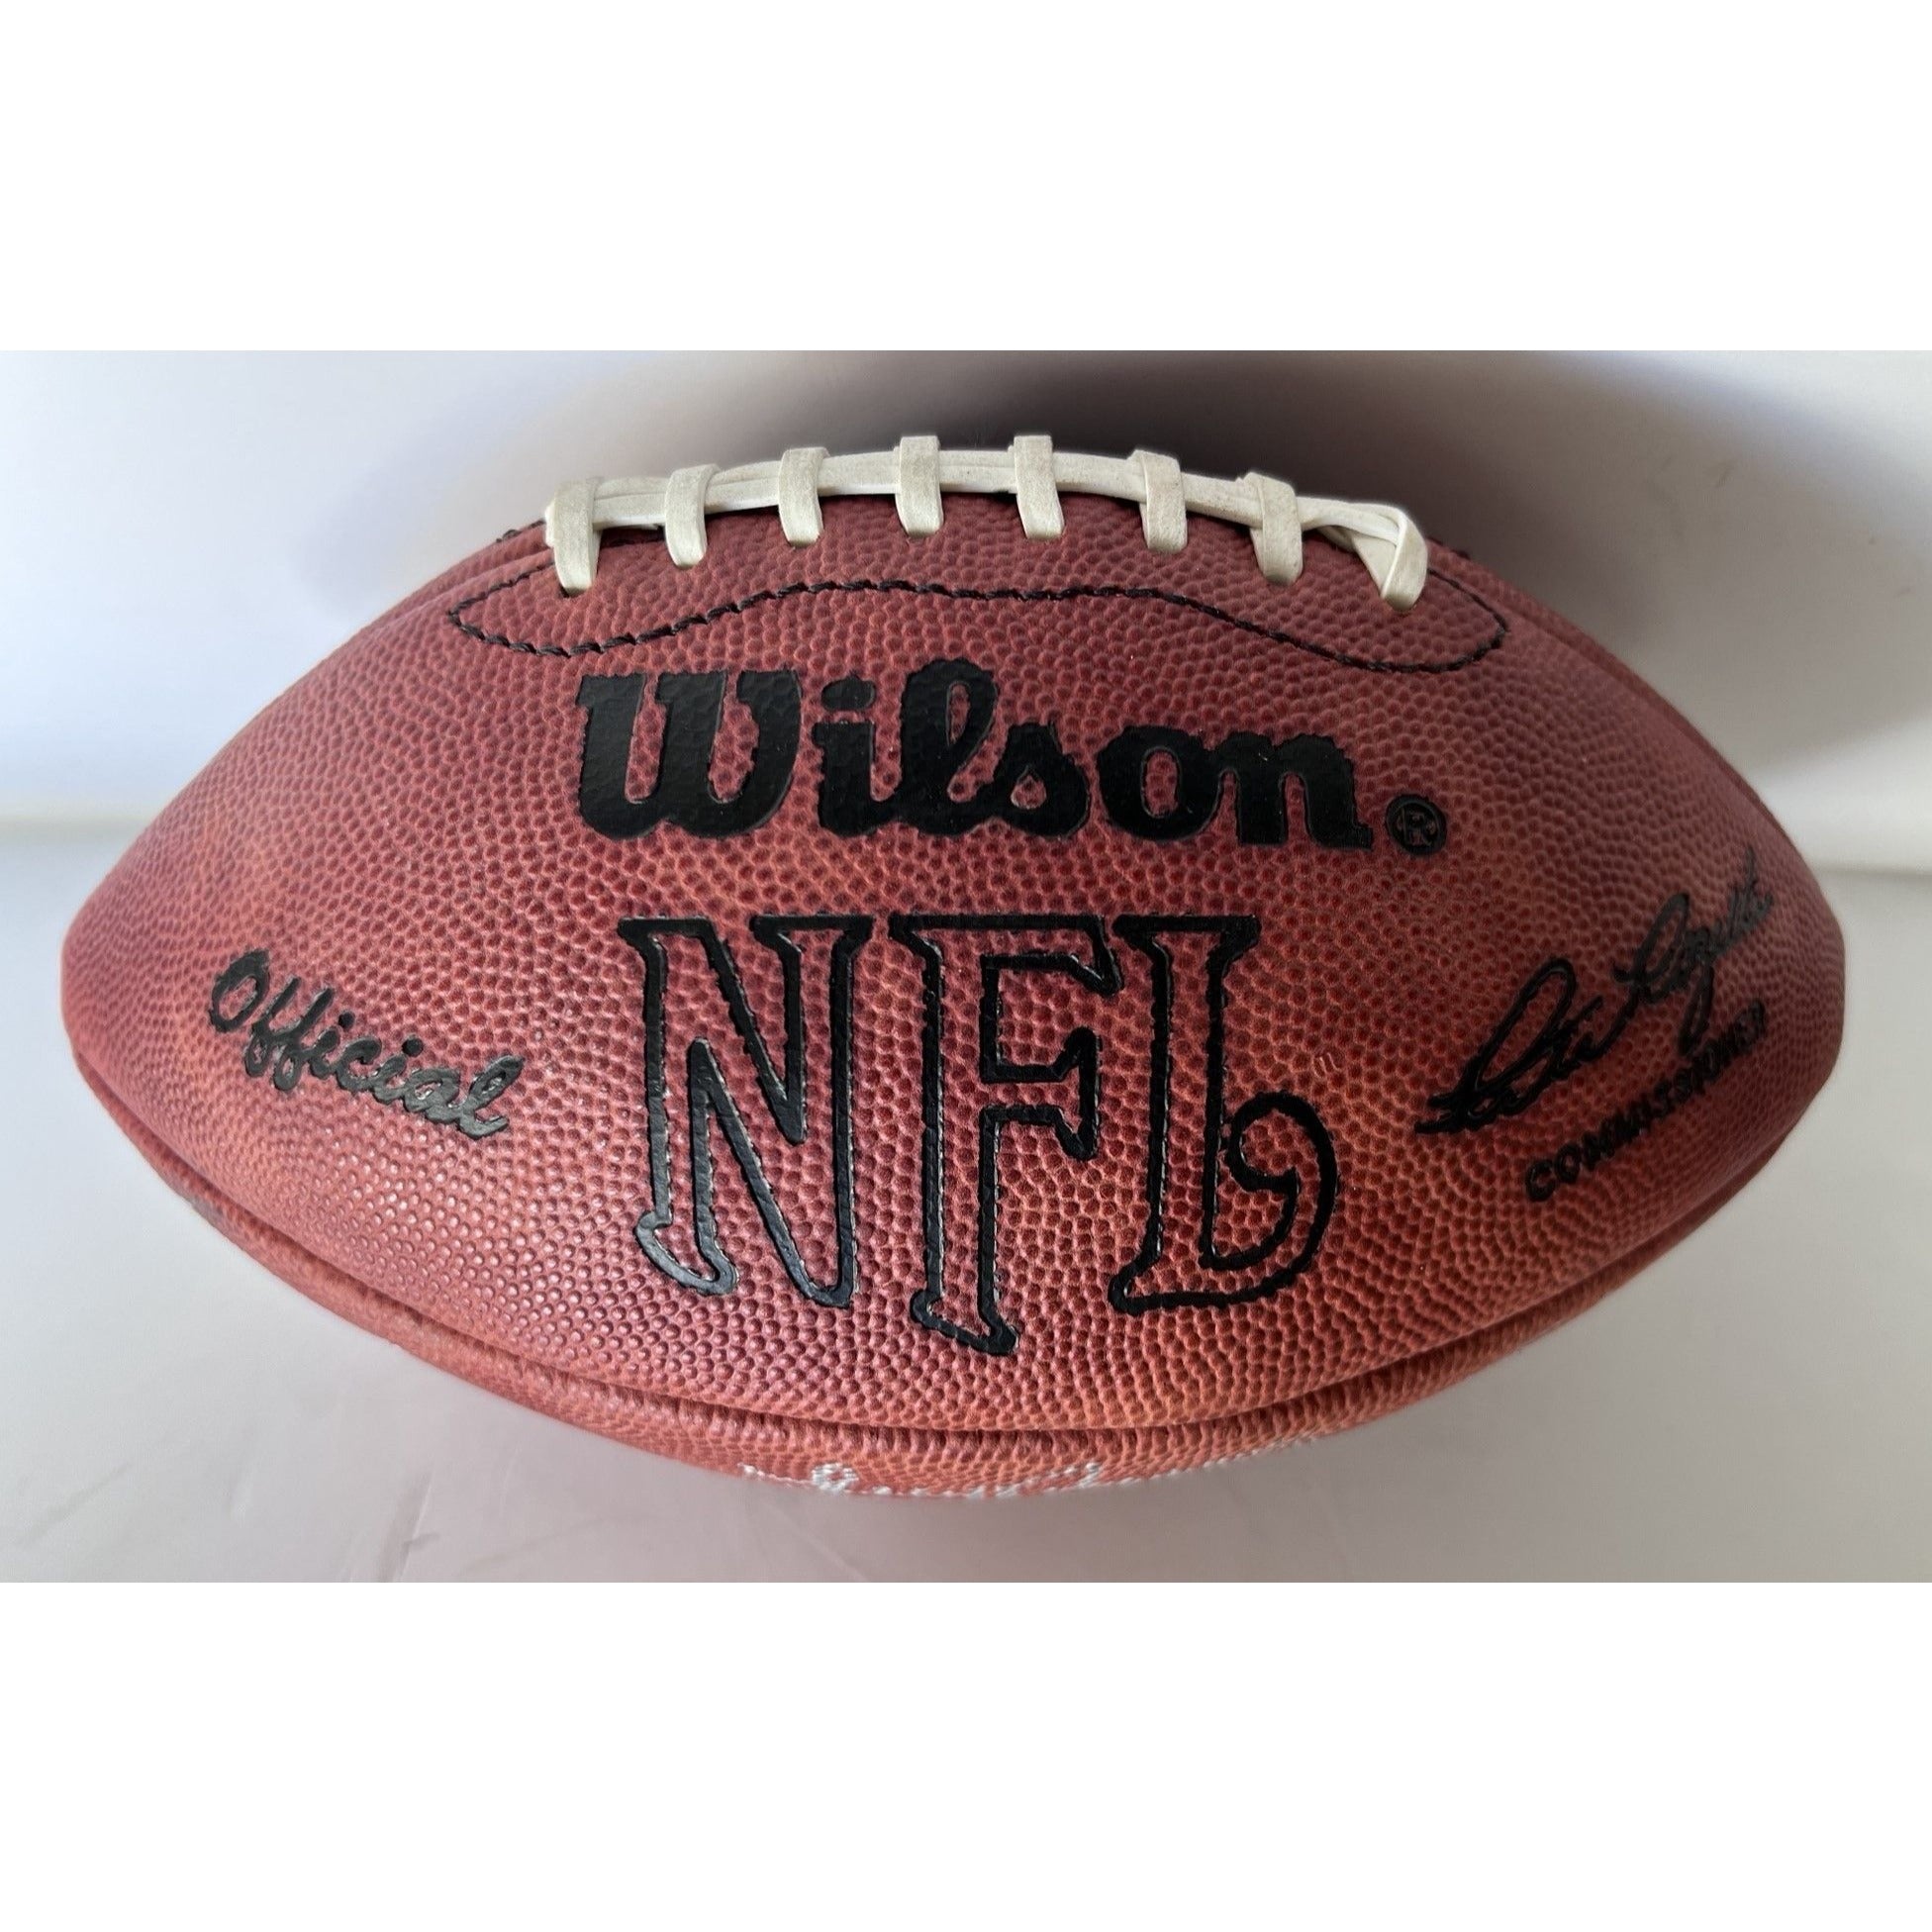 Walter Payton Jim Brown Tony Dorsett Emmitt Smith Barry Sanders NFL game football signed with proof